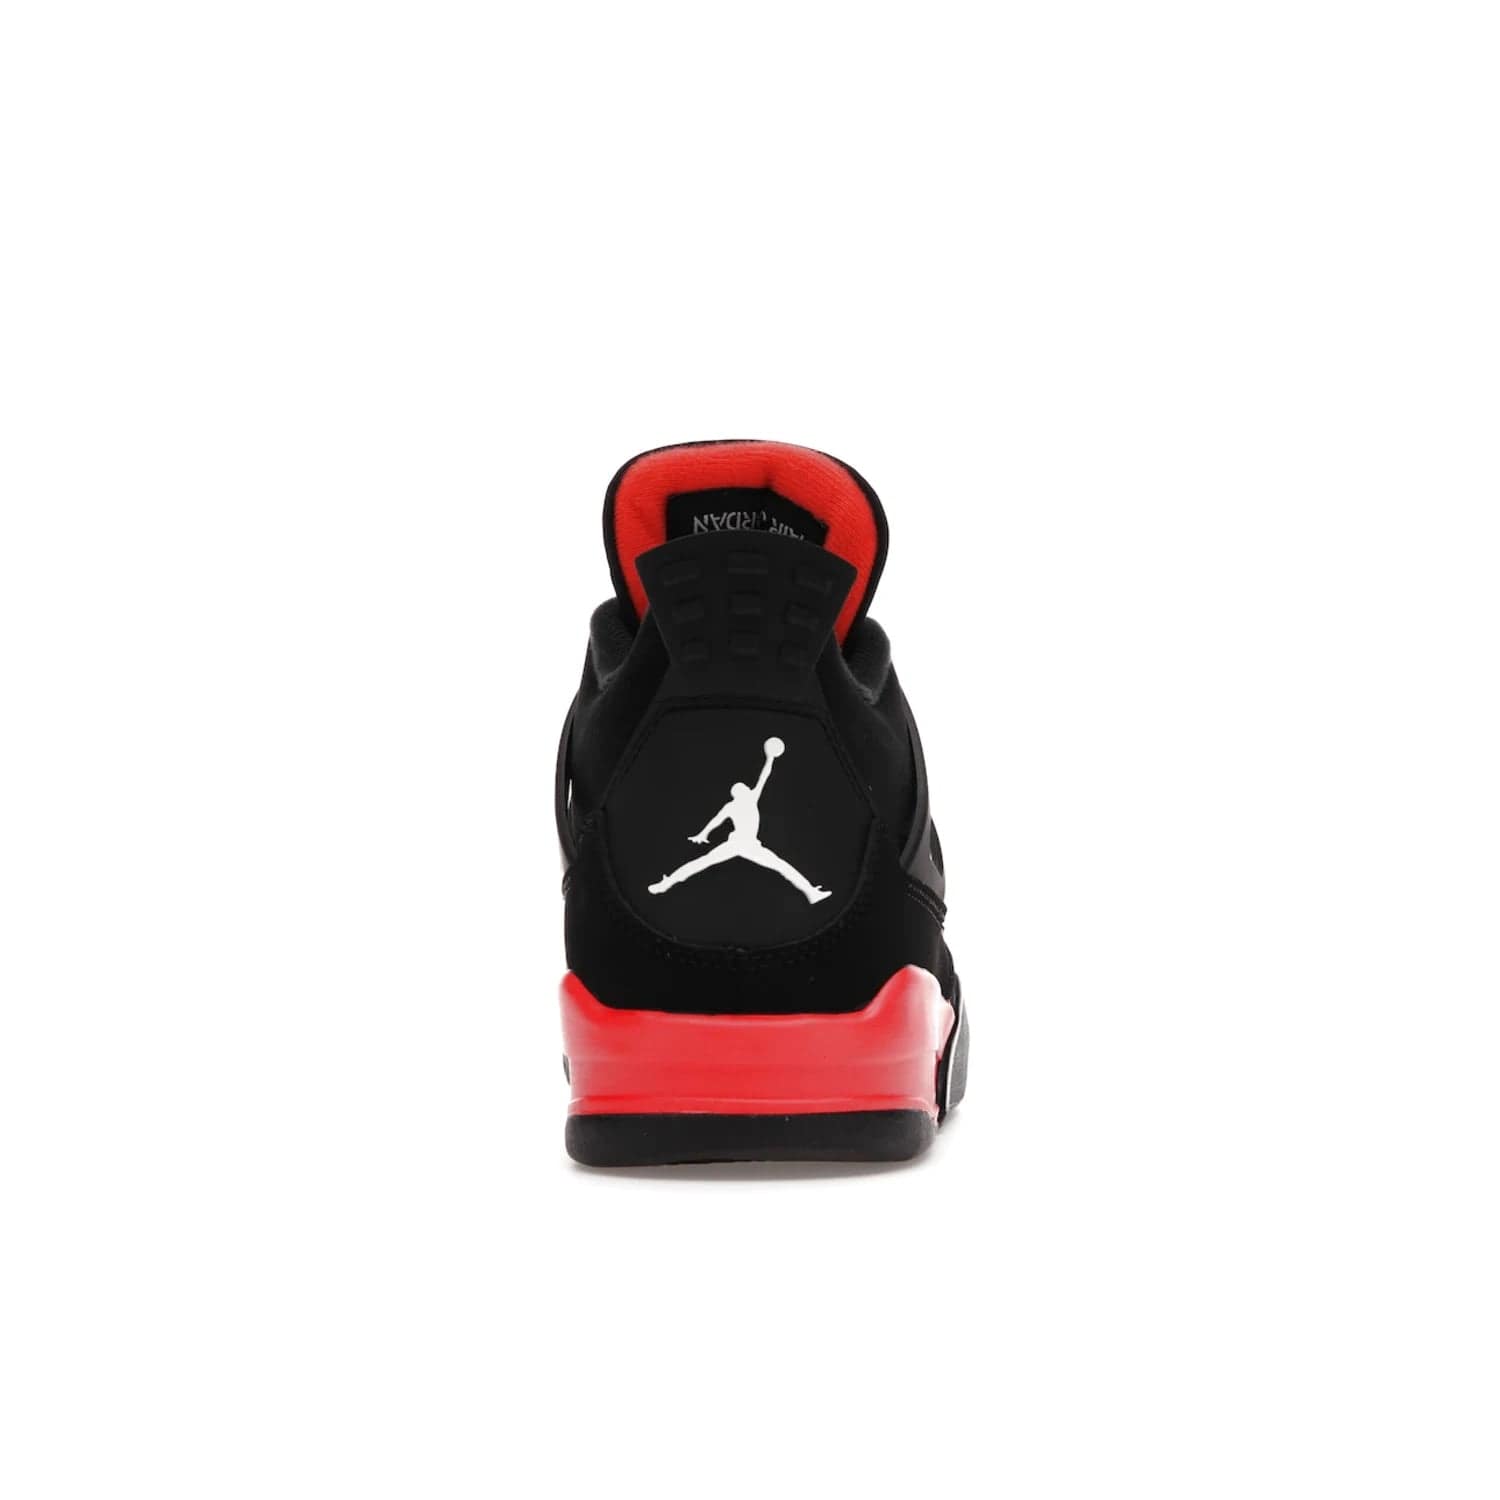 Jordan 4 Retro Red Thunder - Image 28 - Only at www.BallersClubKickz.com - Upscale your footwear with the Air Jordan 4 Retro Red Thunder. Featuring a Durabuck upper, red underlays, signature Flight patch, and vibrant red midsole, this retro sneaker adds style and edge. Releases in January 2022.